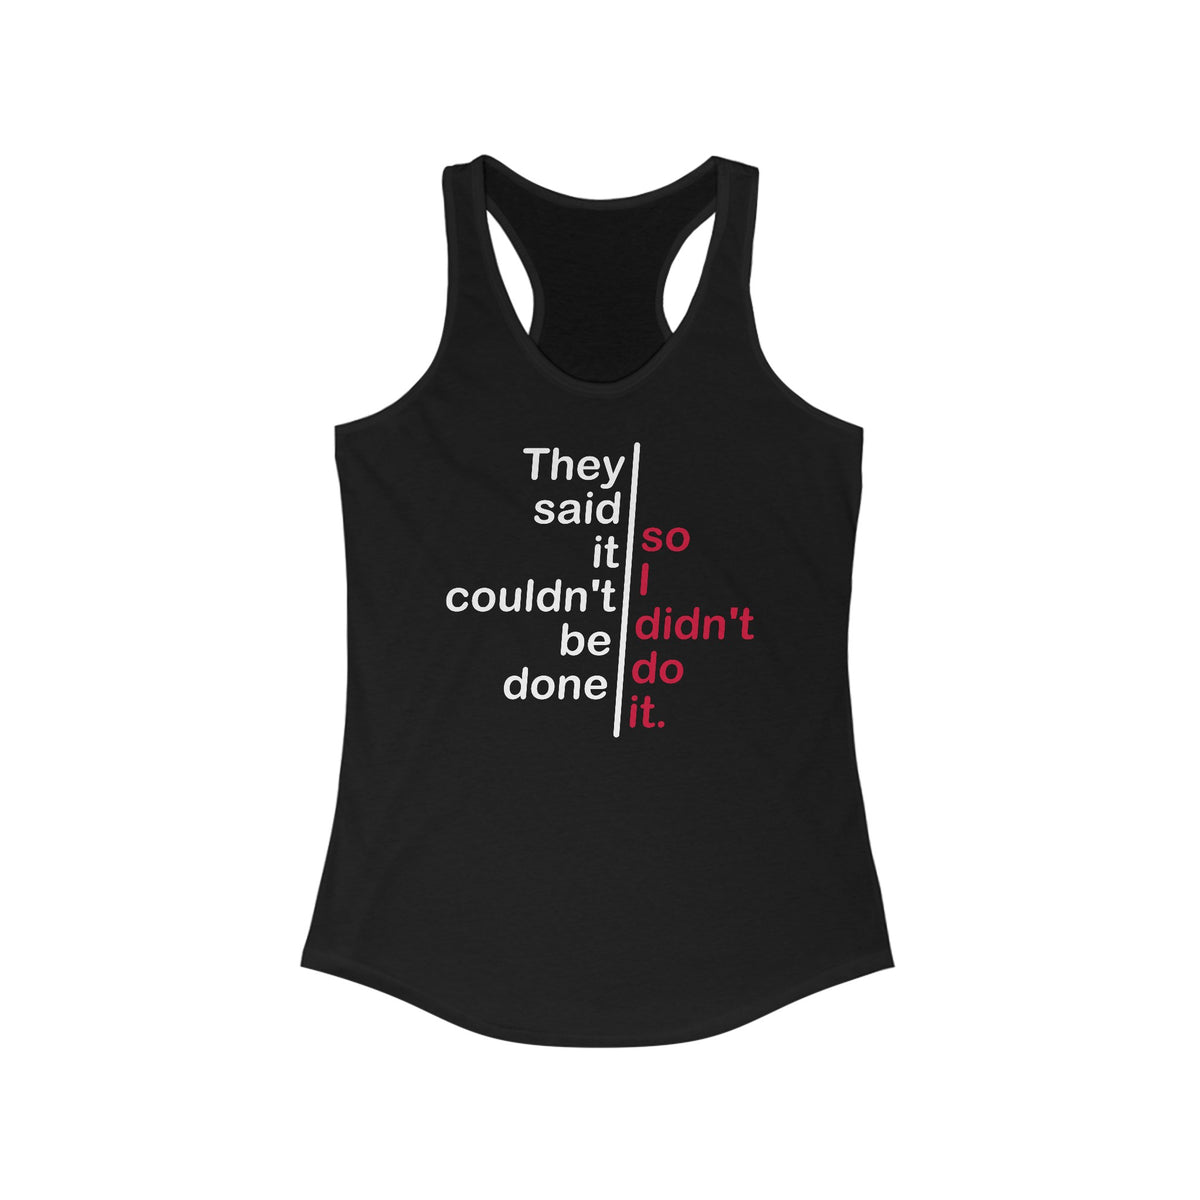 They Said It Couldn't Be Done - So I Didn't Do It. - LADIES TANK